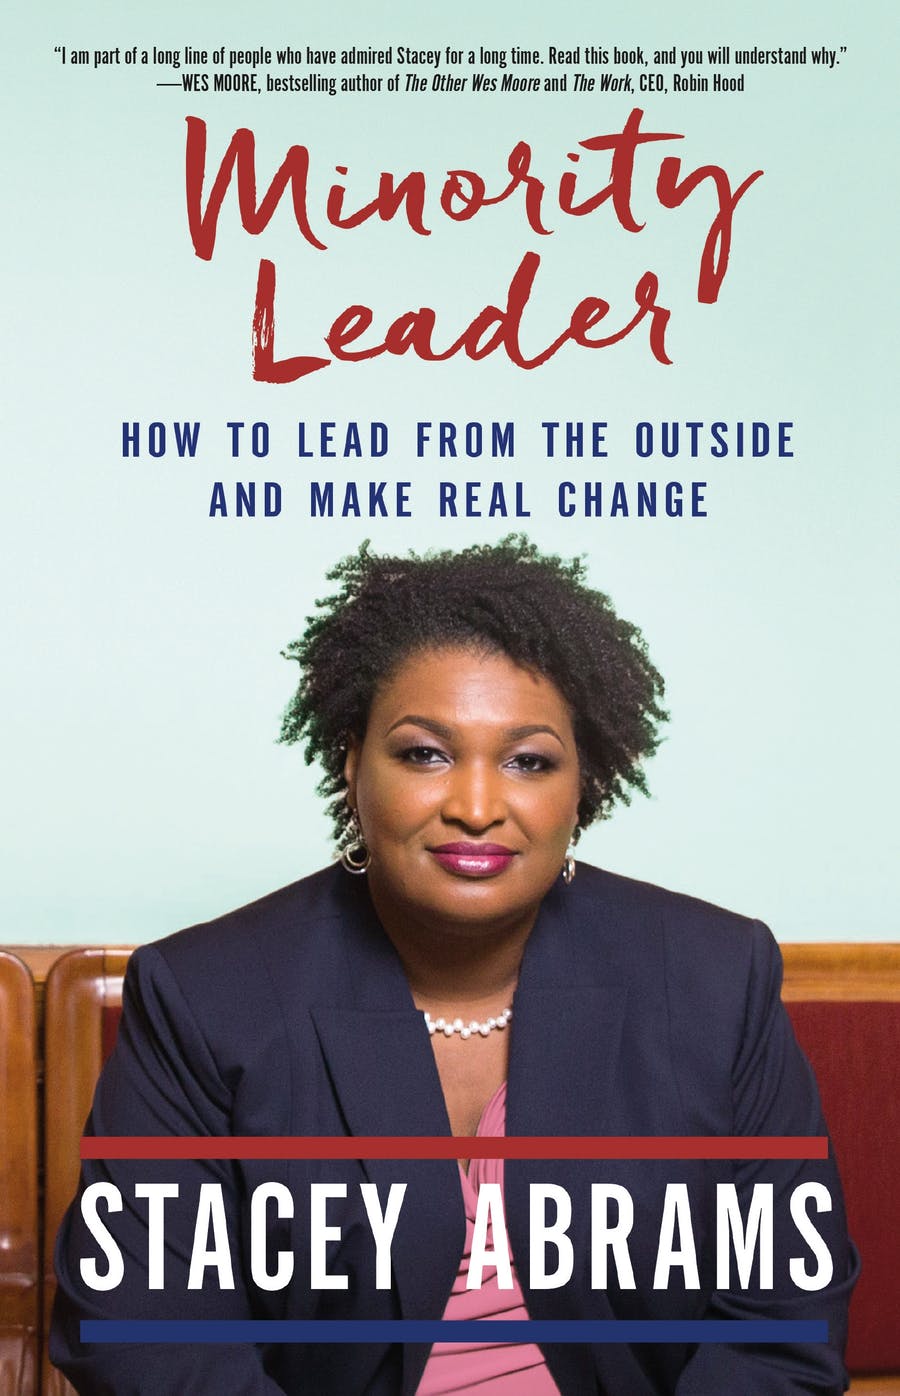 raincoast Minority Leader - How to Lead from the Outside and Make Real Change by Stacey Abrams